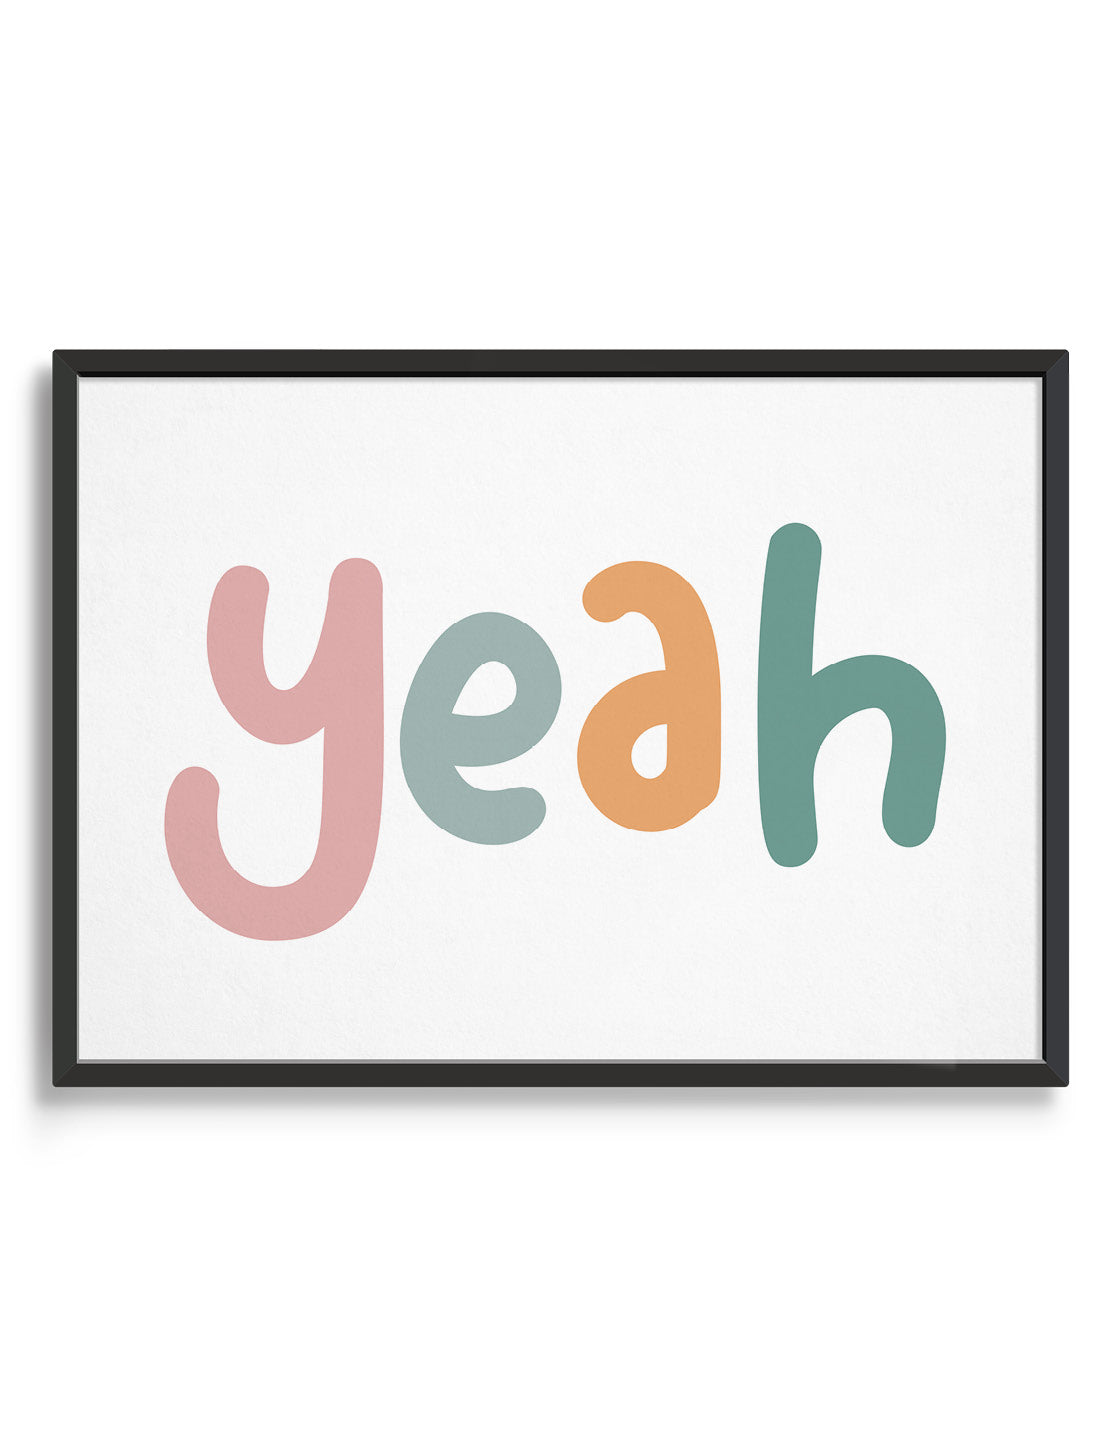 multi colour text typography print of the word yeah in childish font against a white background